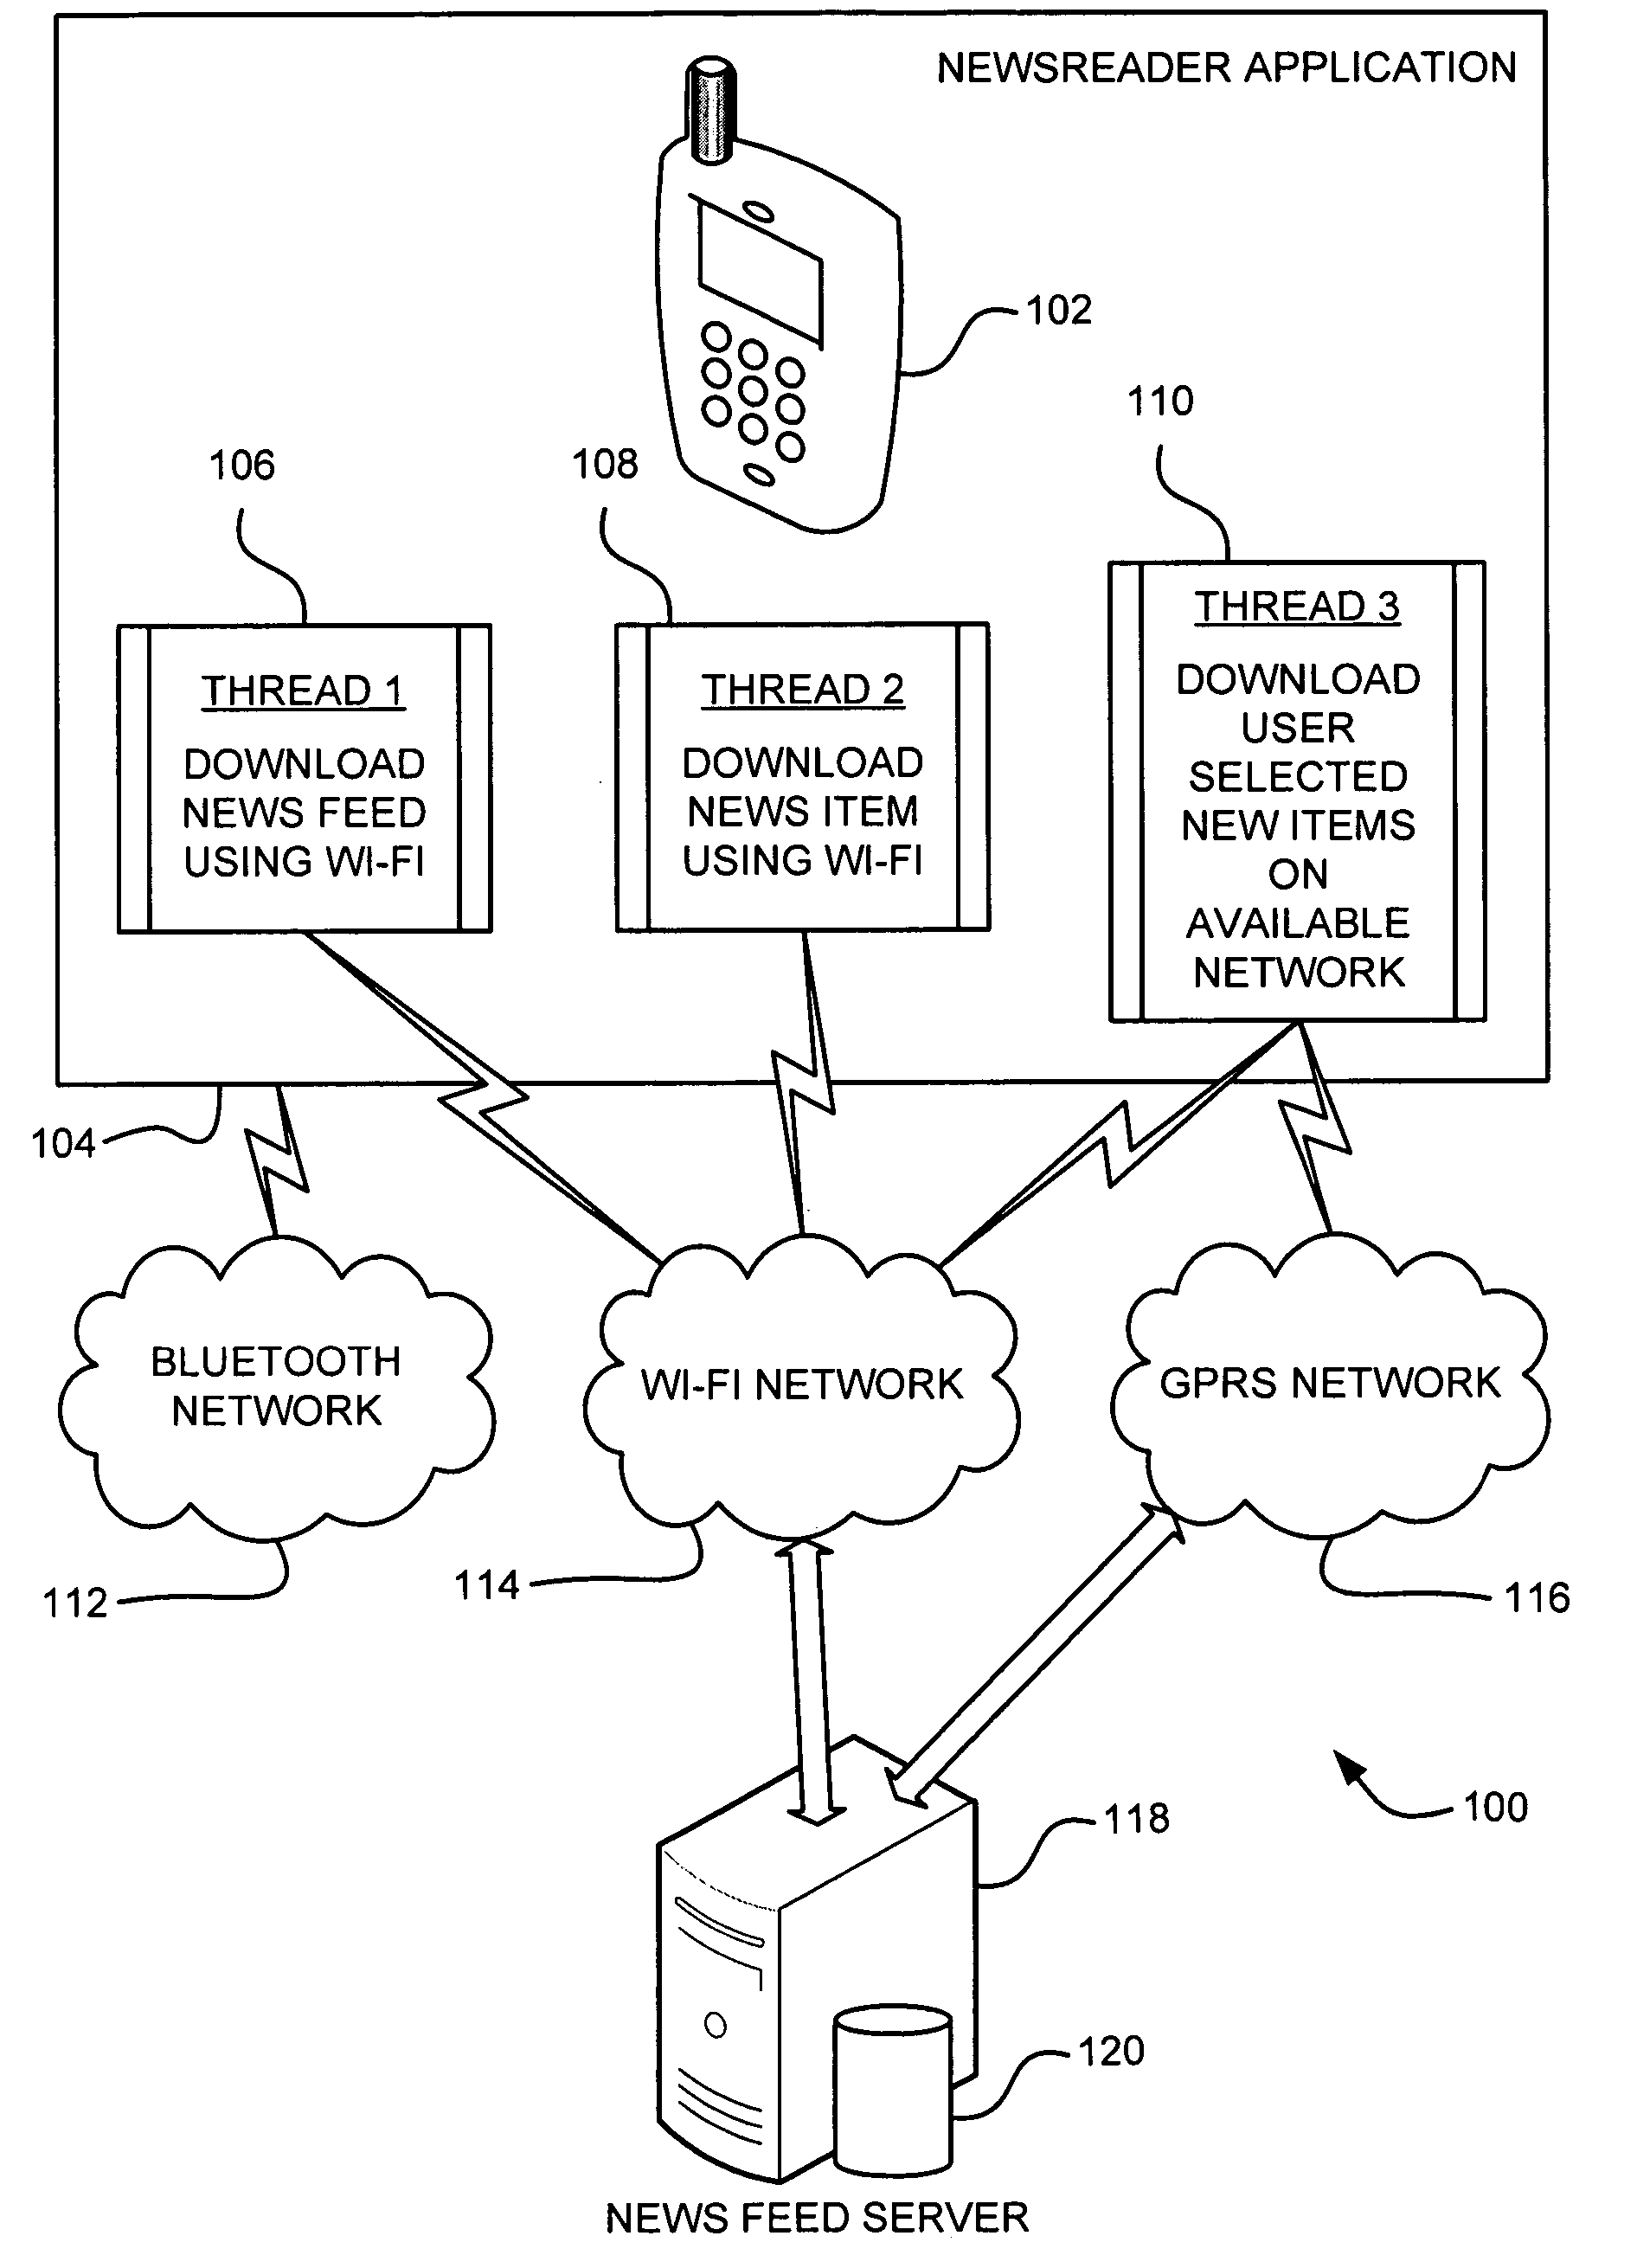 Network interface routing using computational context